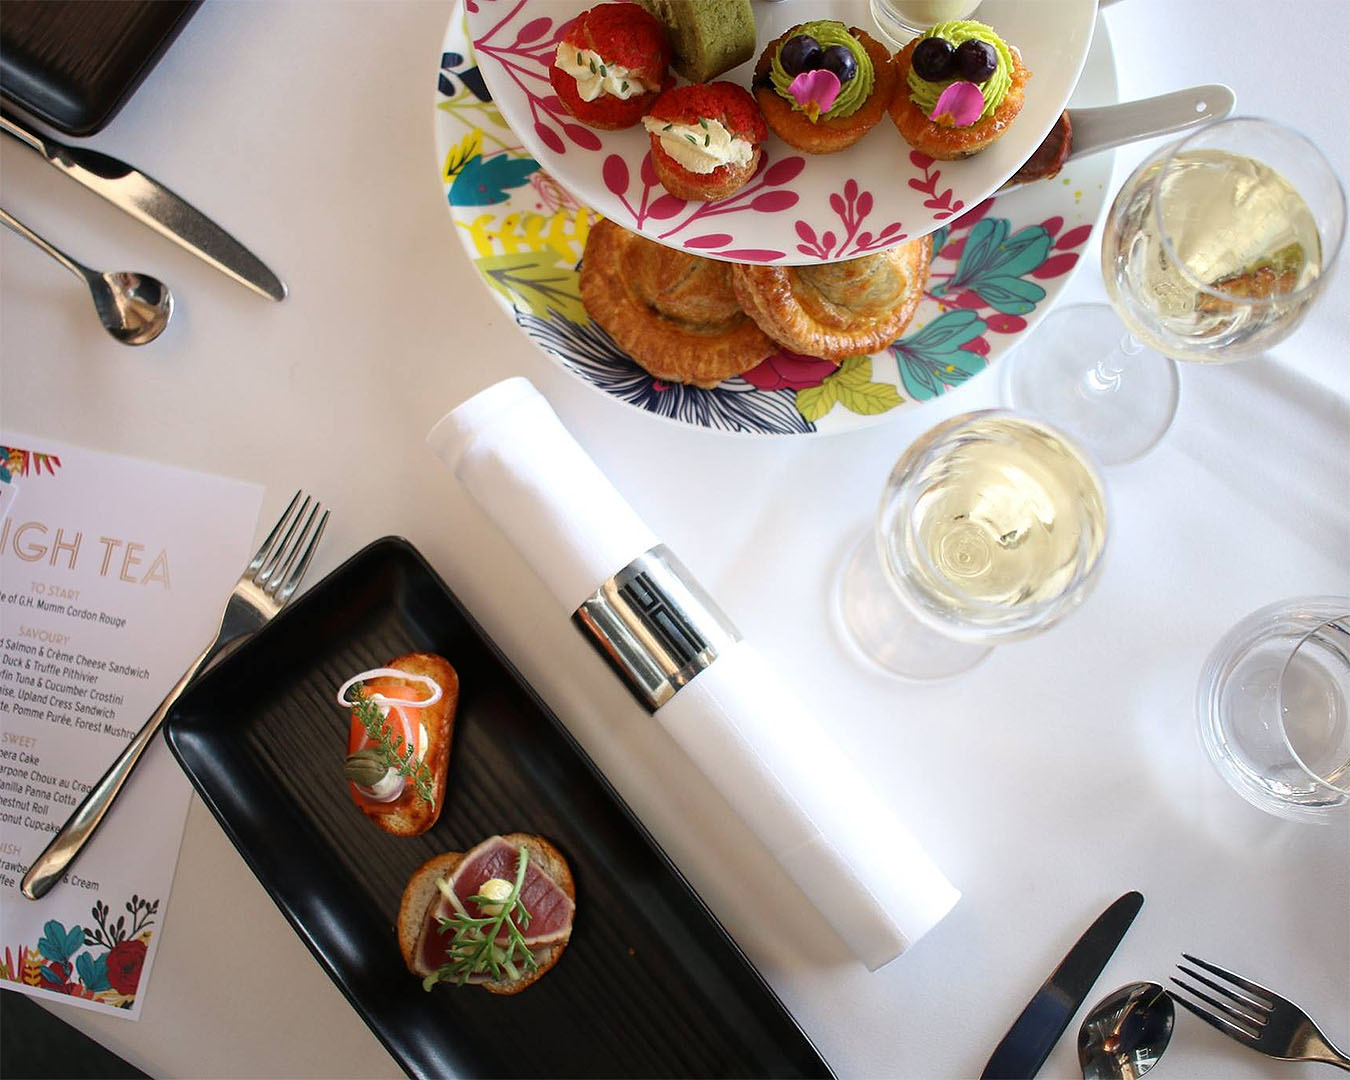 A high tea with champagne is laid out at Harbourside.